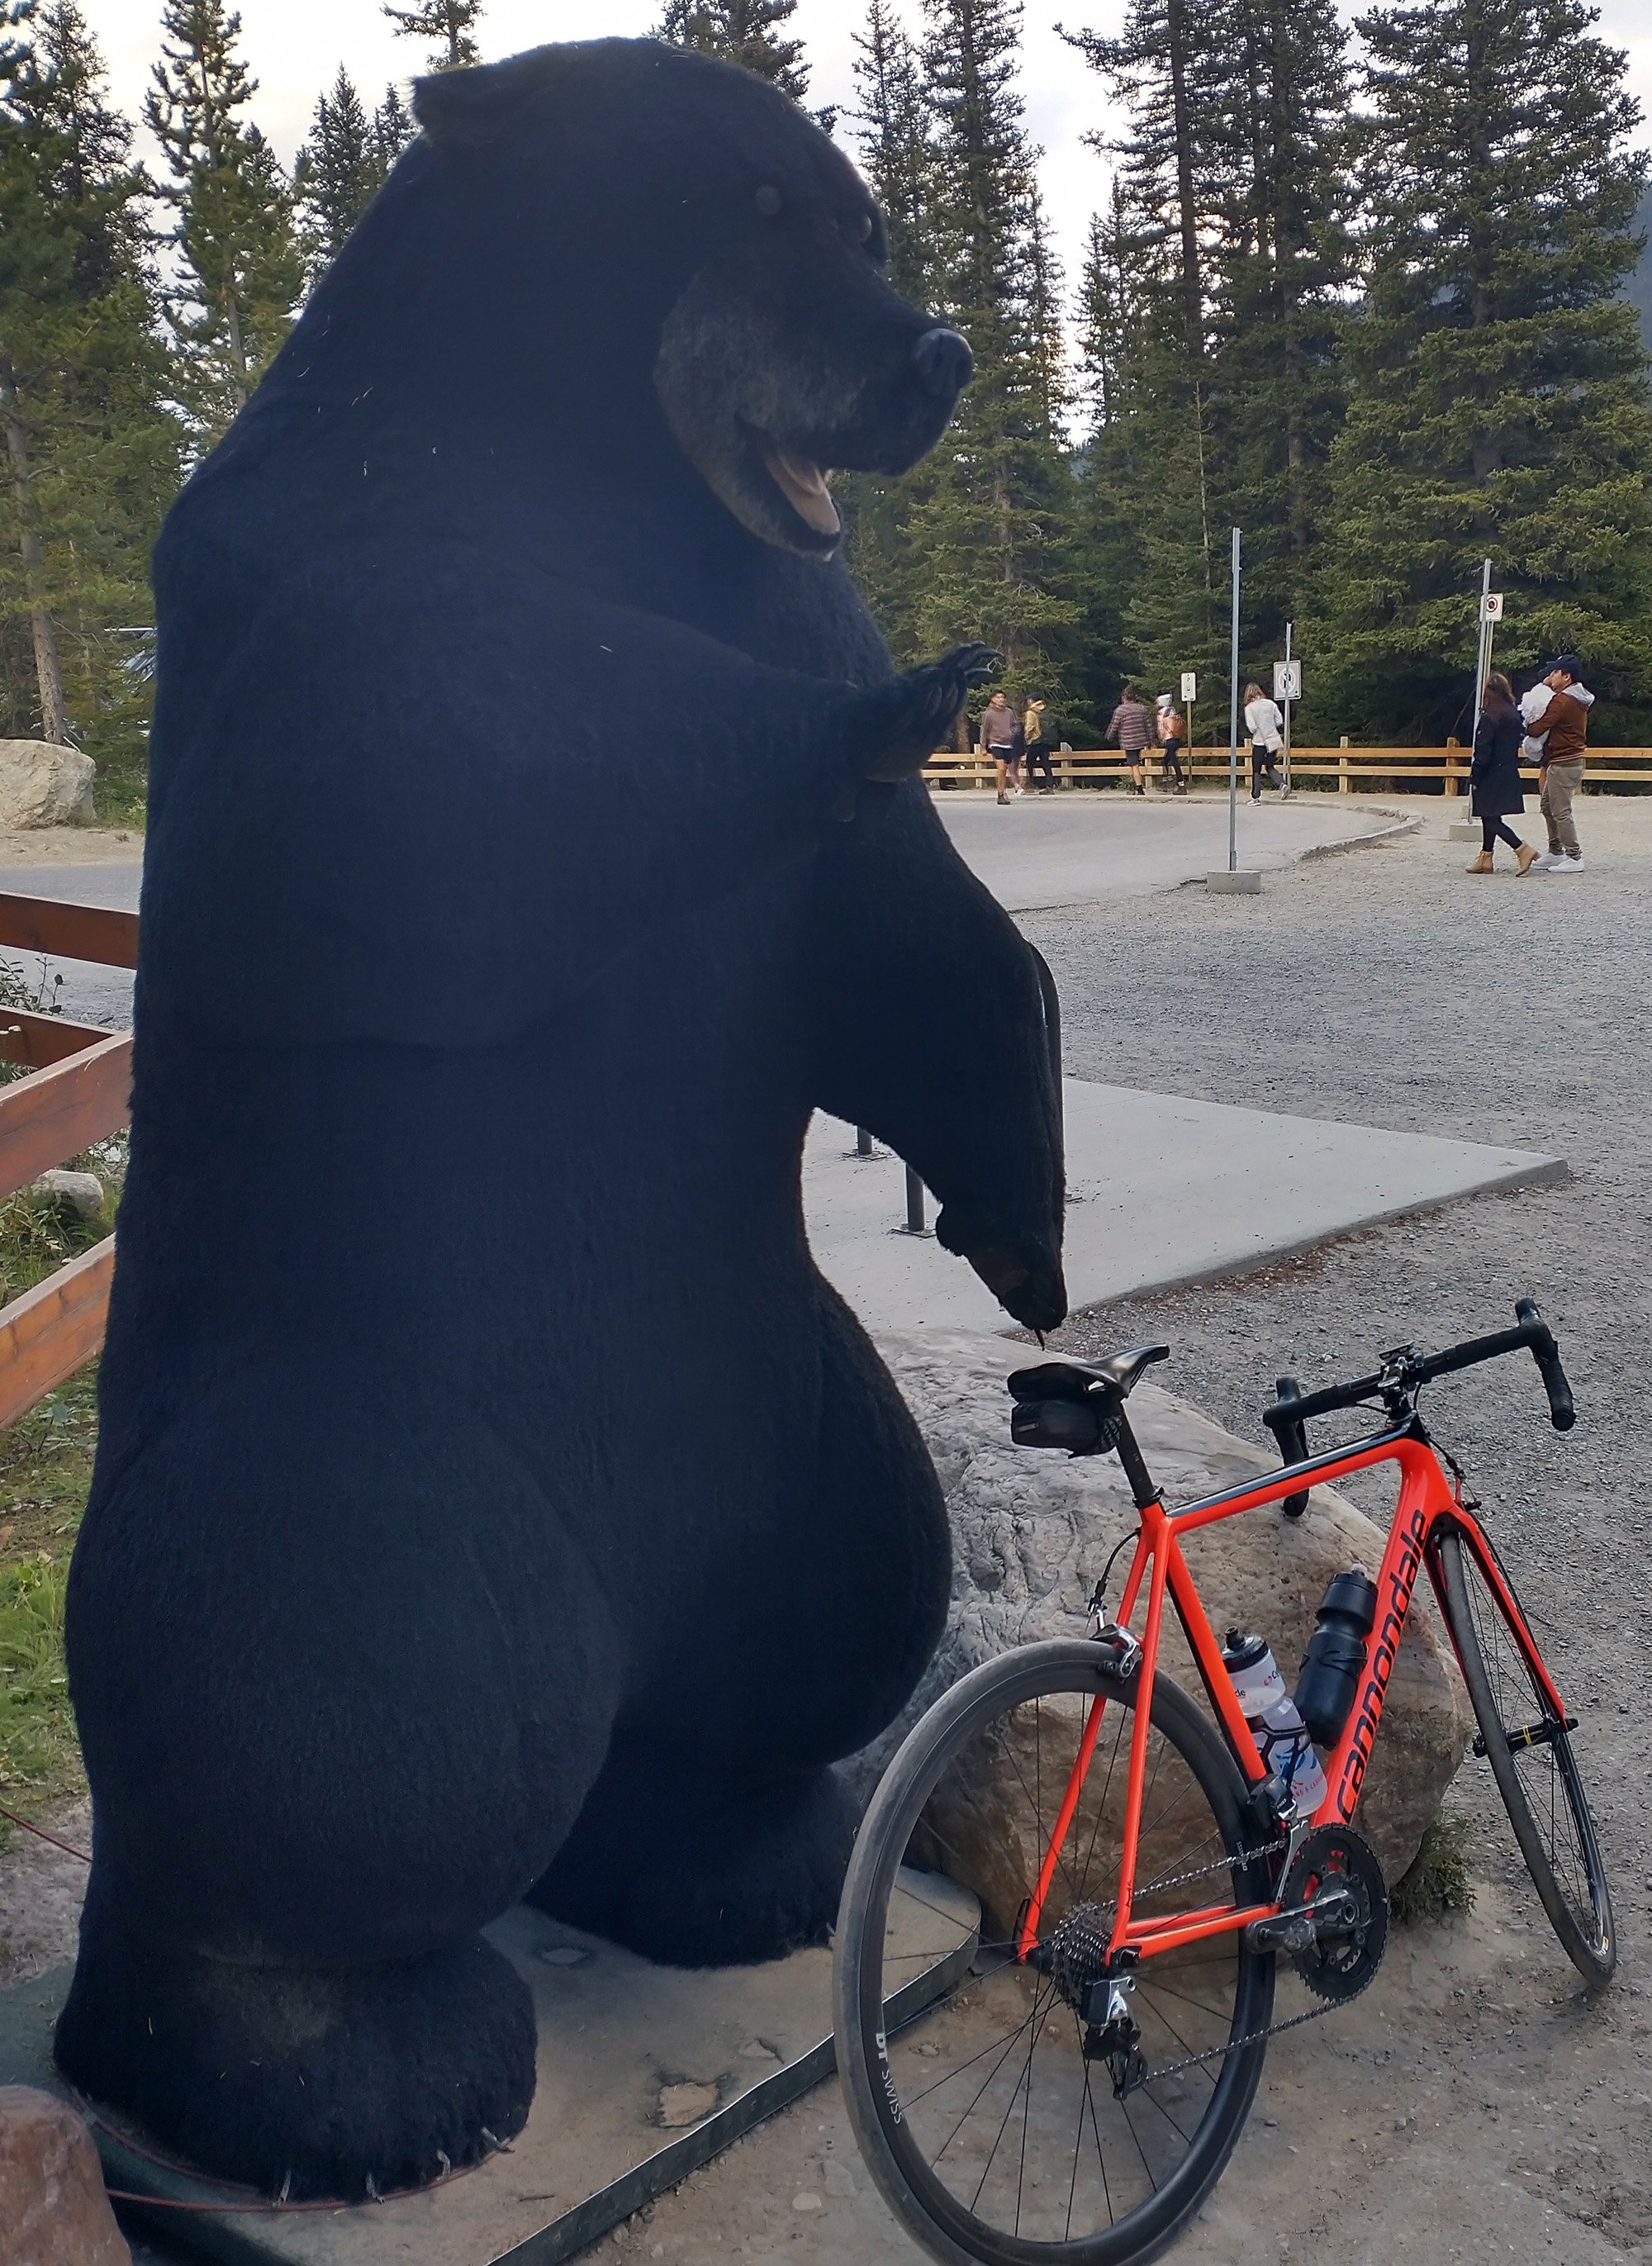 Ok one last bear though. Camped again that night, which was great. Make tons of food. Very cold night however, probably went down to freezing. Lake Louise does sit at about 1600m elevation.